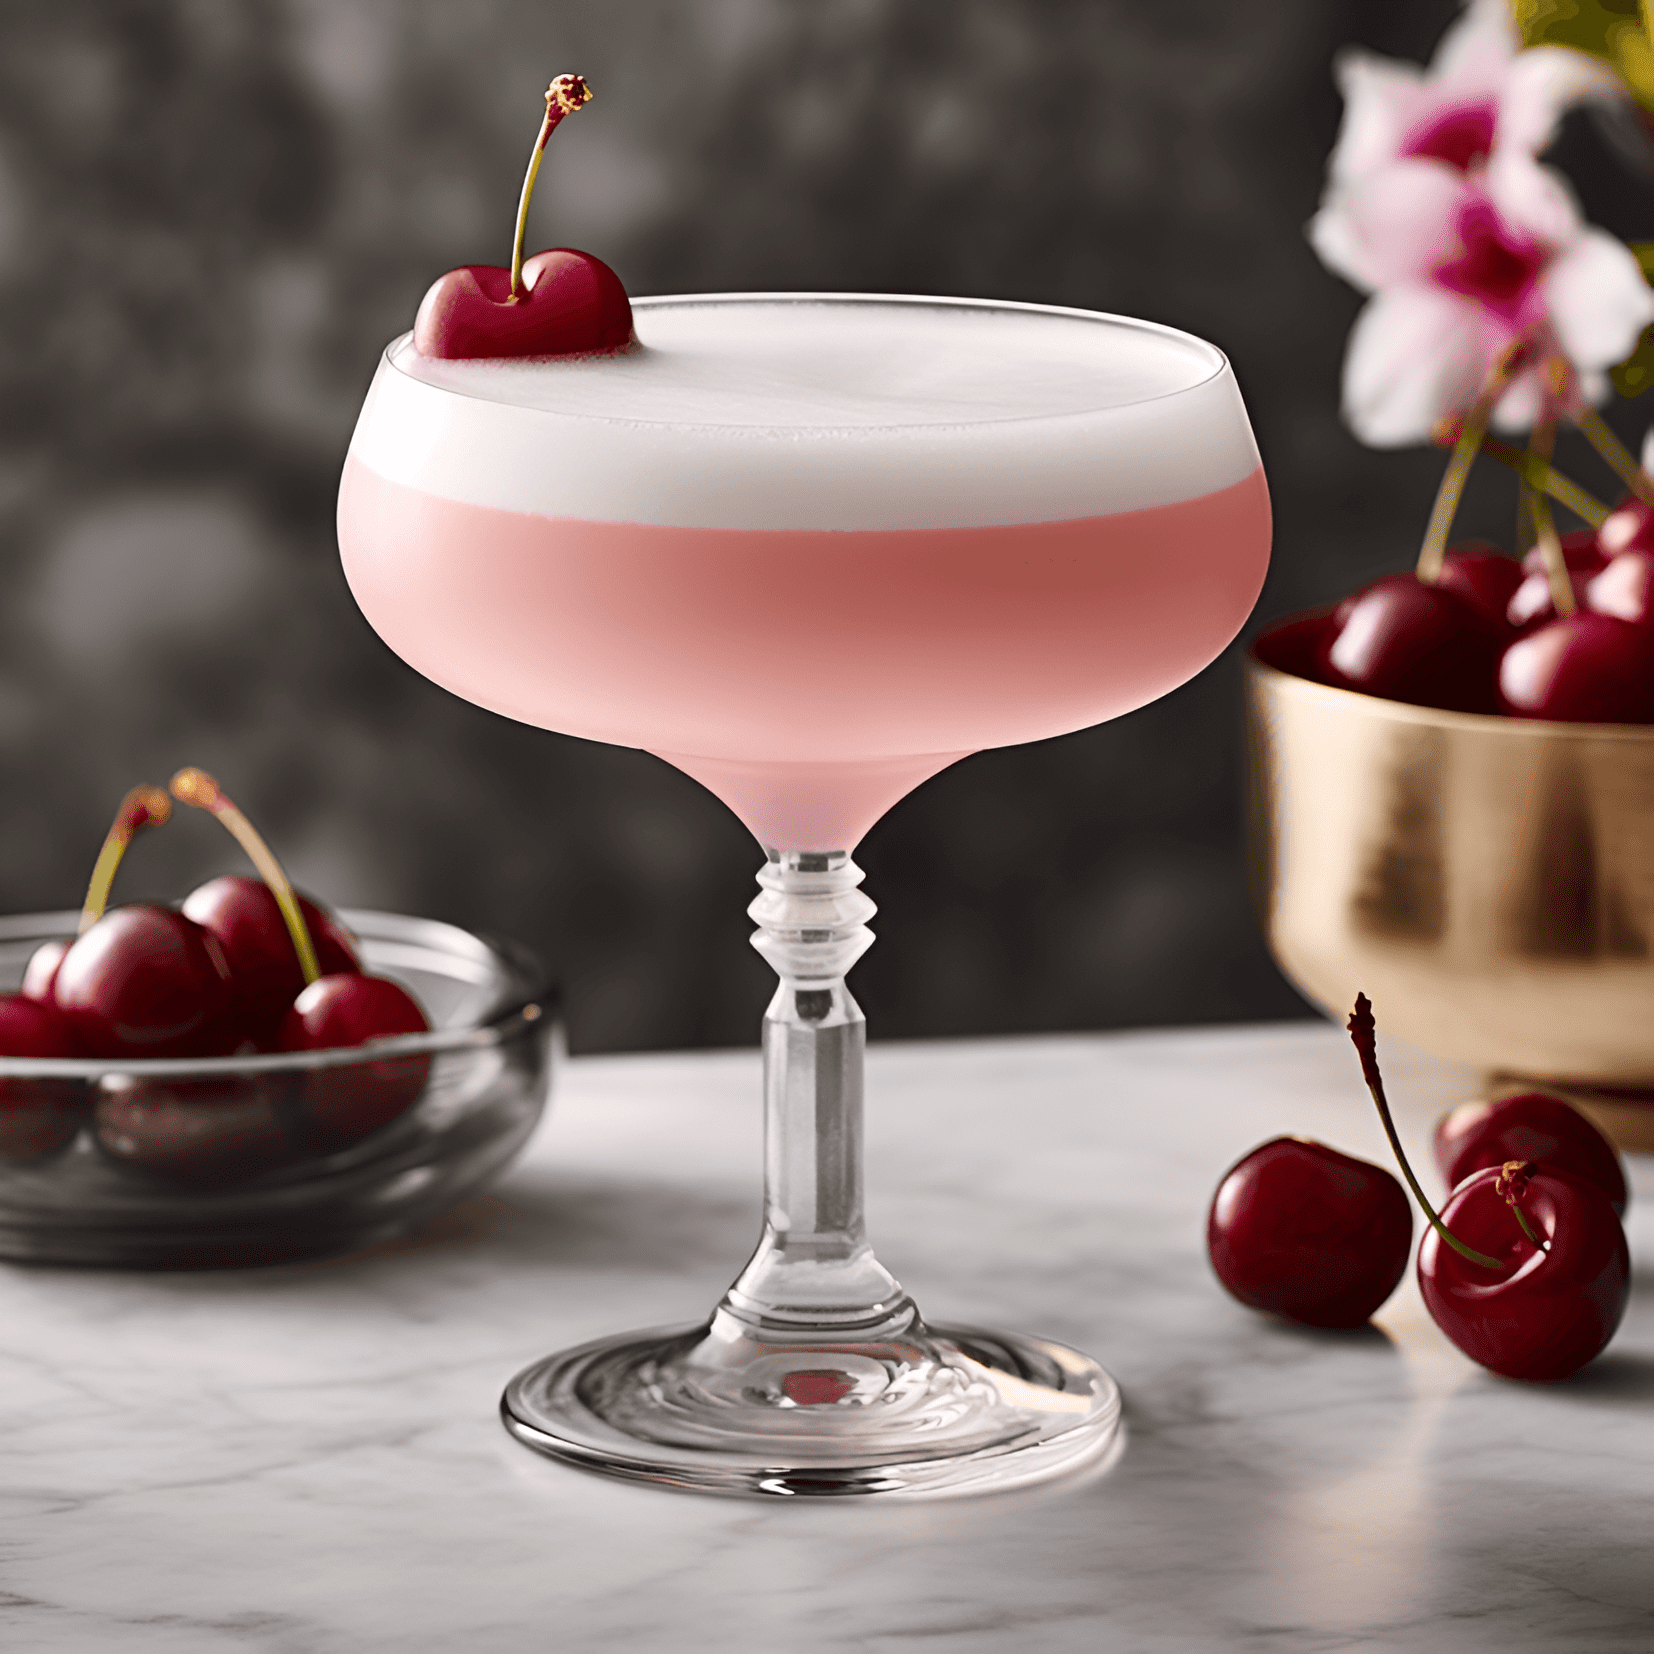 The Pink Lady has a delicate, fruity, and slightly sweet taste with a hint of tartness. The gin provides a subtle, herbal undertone, while the grenadine and egg white create a smooth, velvety texture.